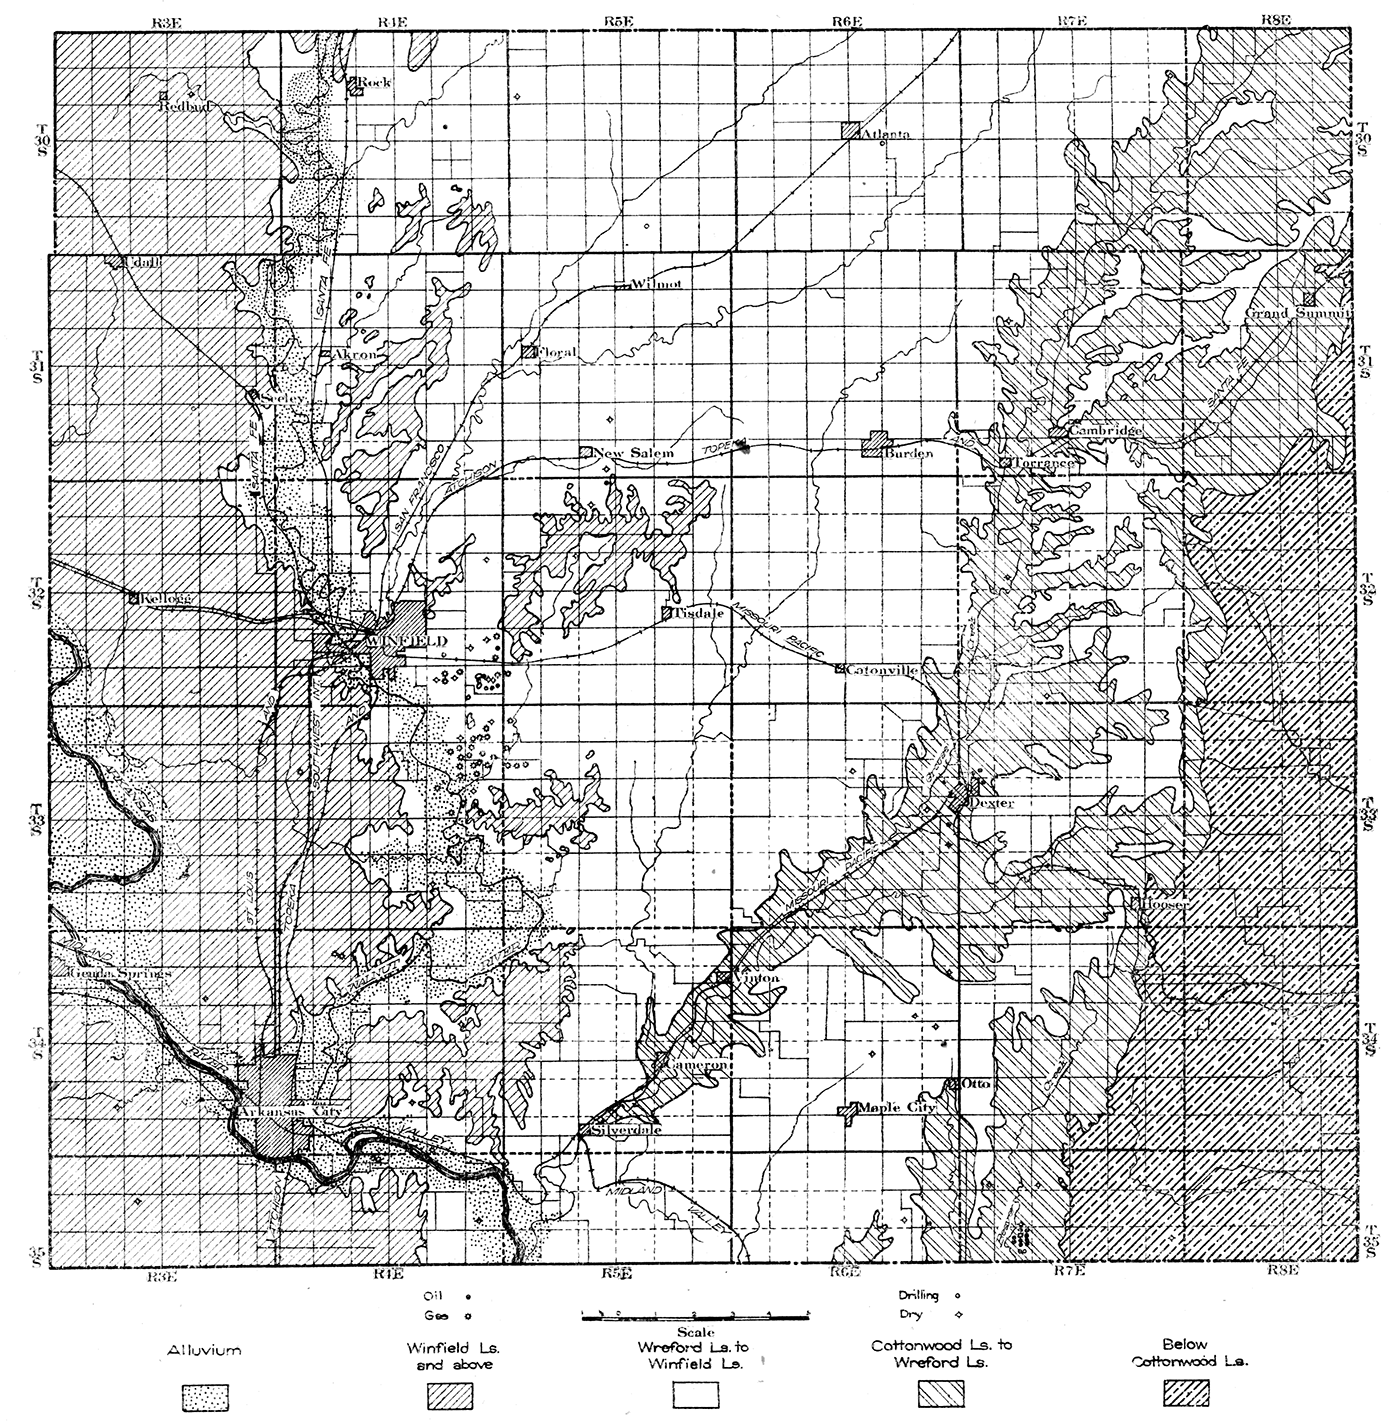 Geological and production map of Cowley County, Kansas.